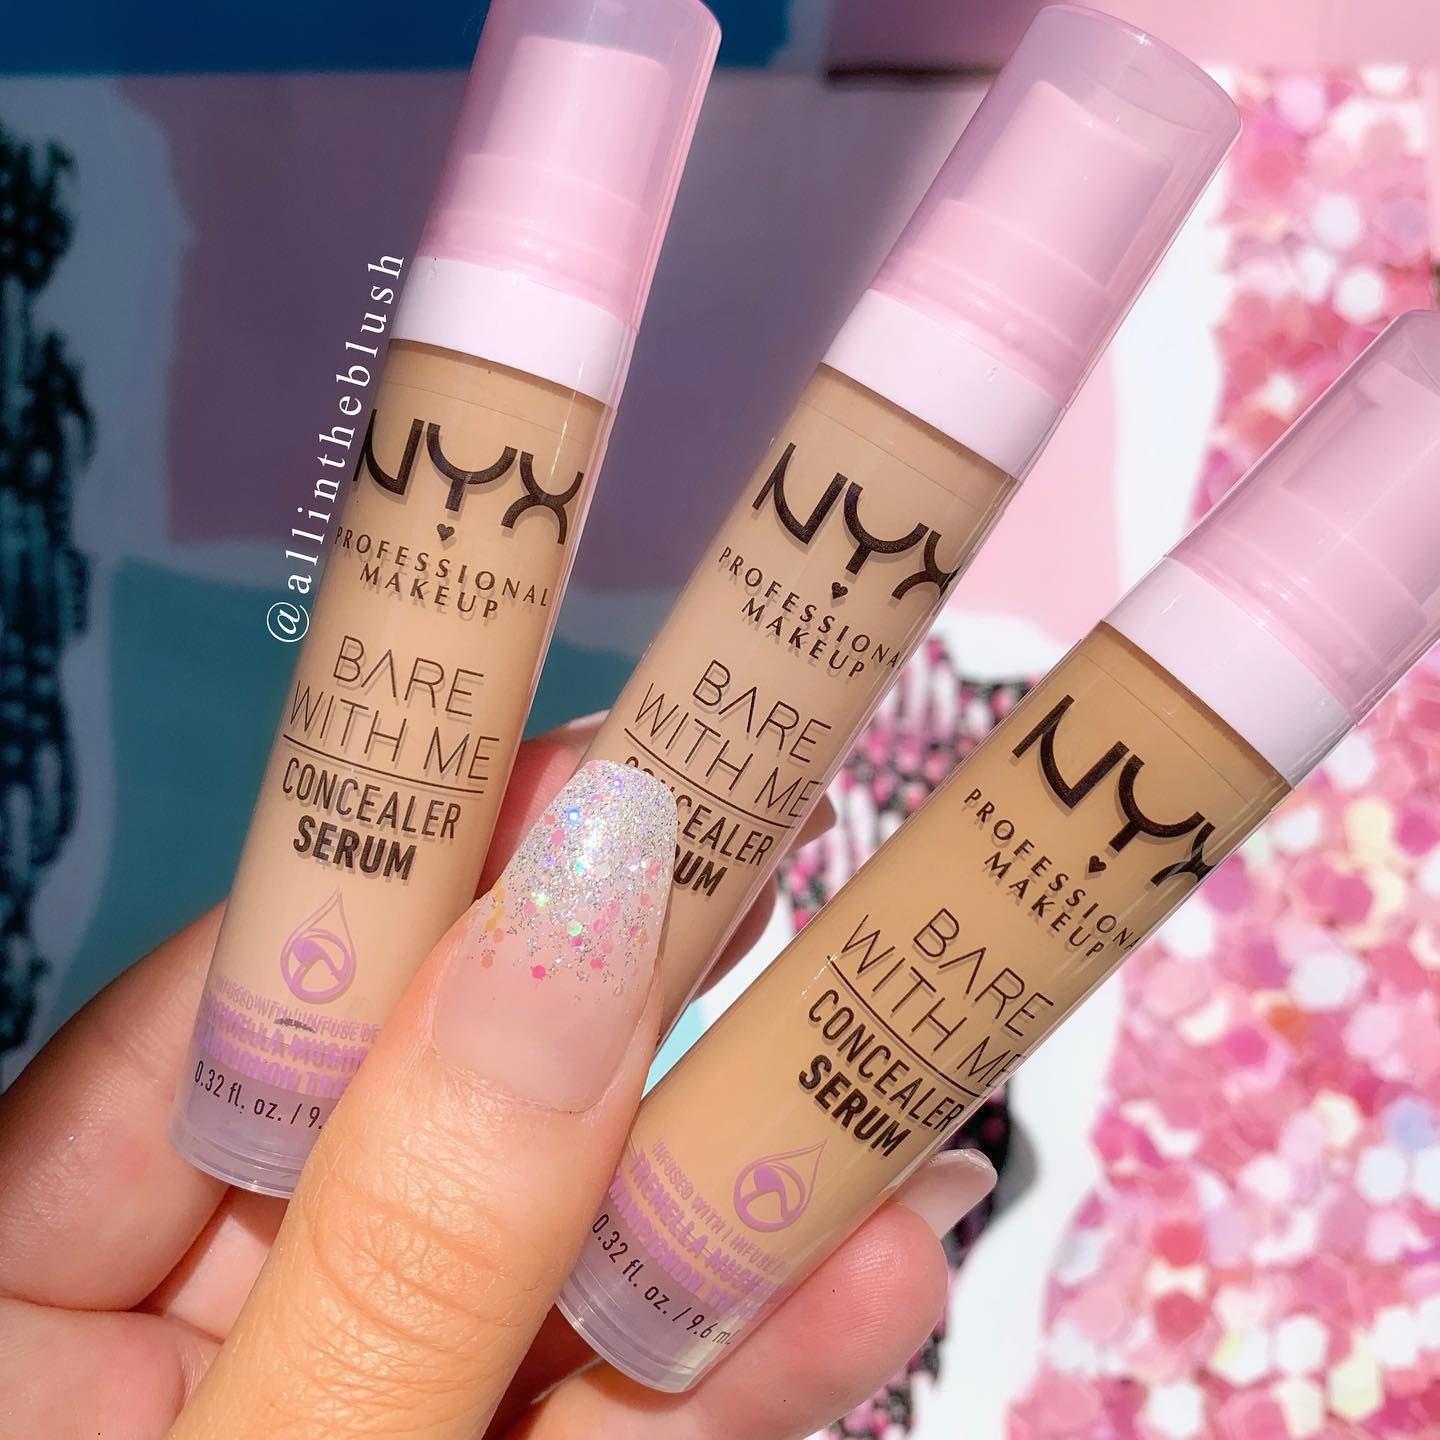 NEW Bare With Me Concealer NYX: Serum In Swatches from Review All The - Blush 